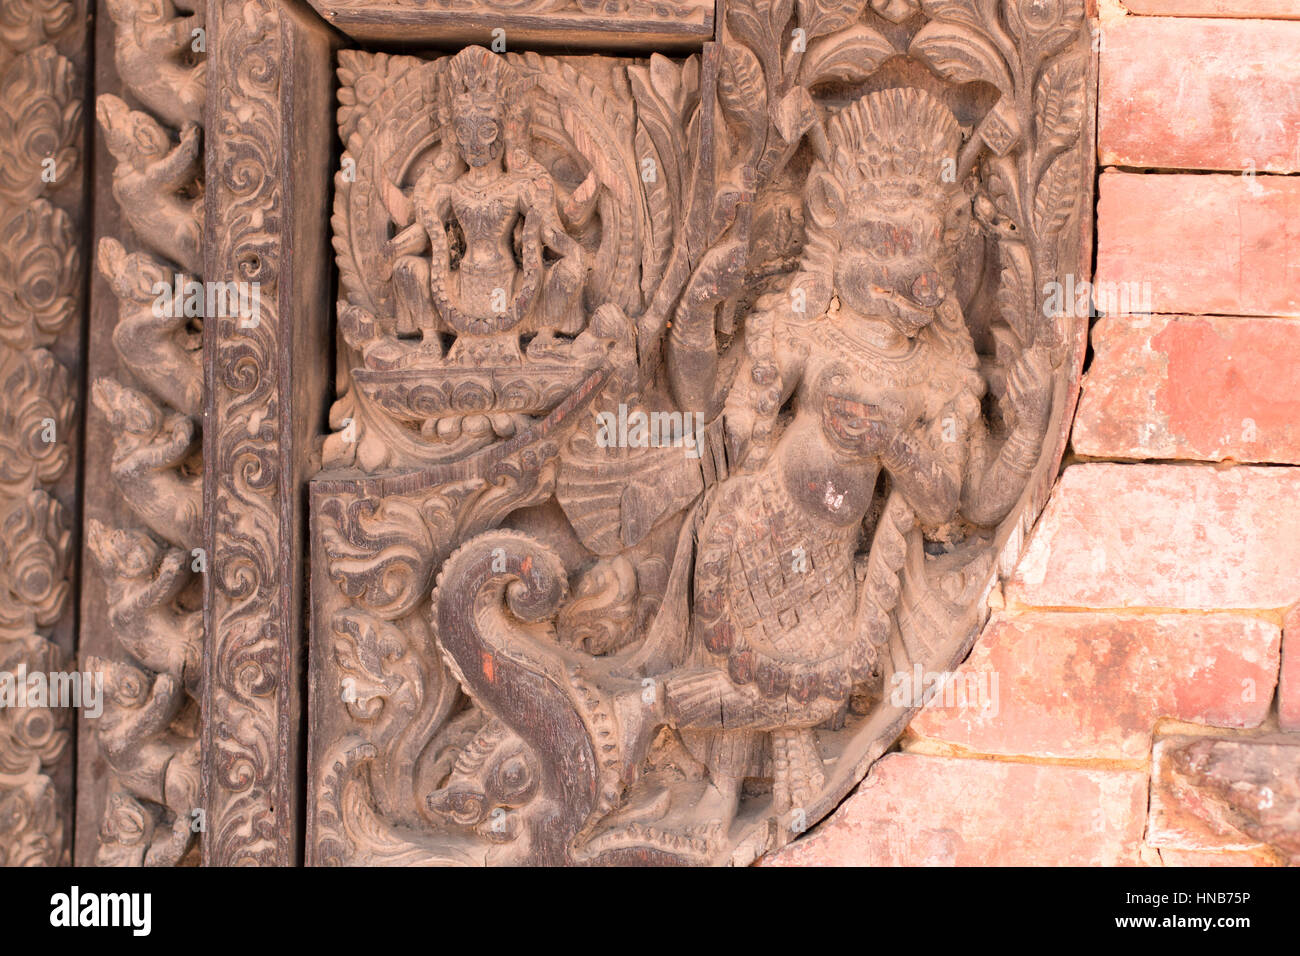 Wood carving of Hindu deities and heavenly nymphs adorn the walls of a building in Bhaktapur, Kathmandu Stock Photo